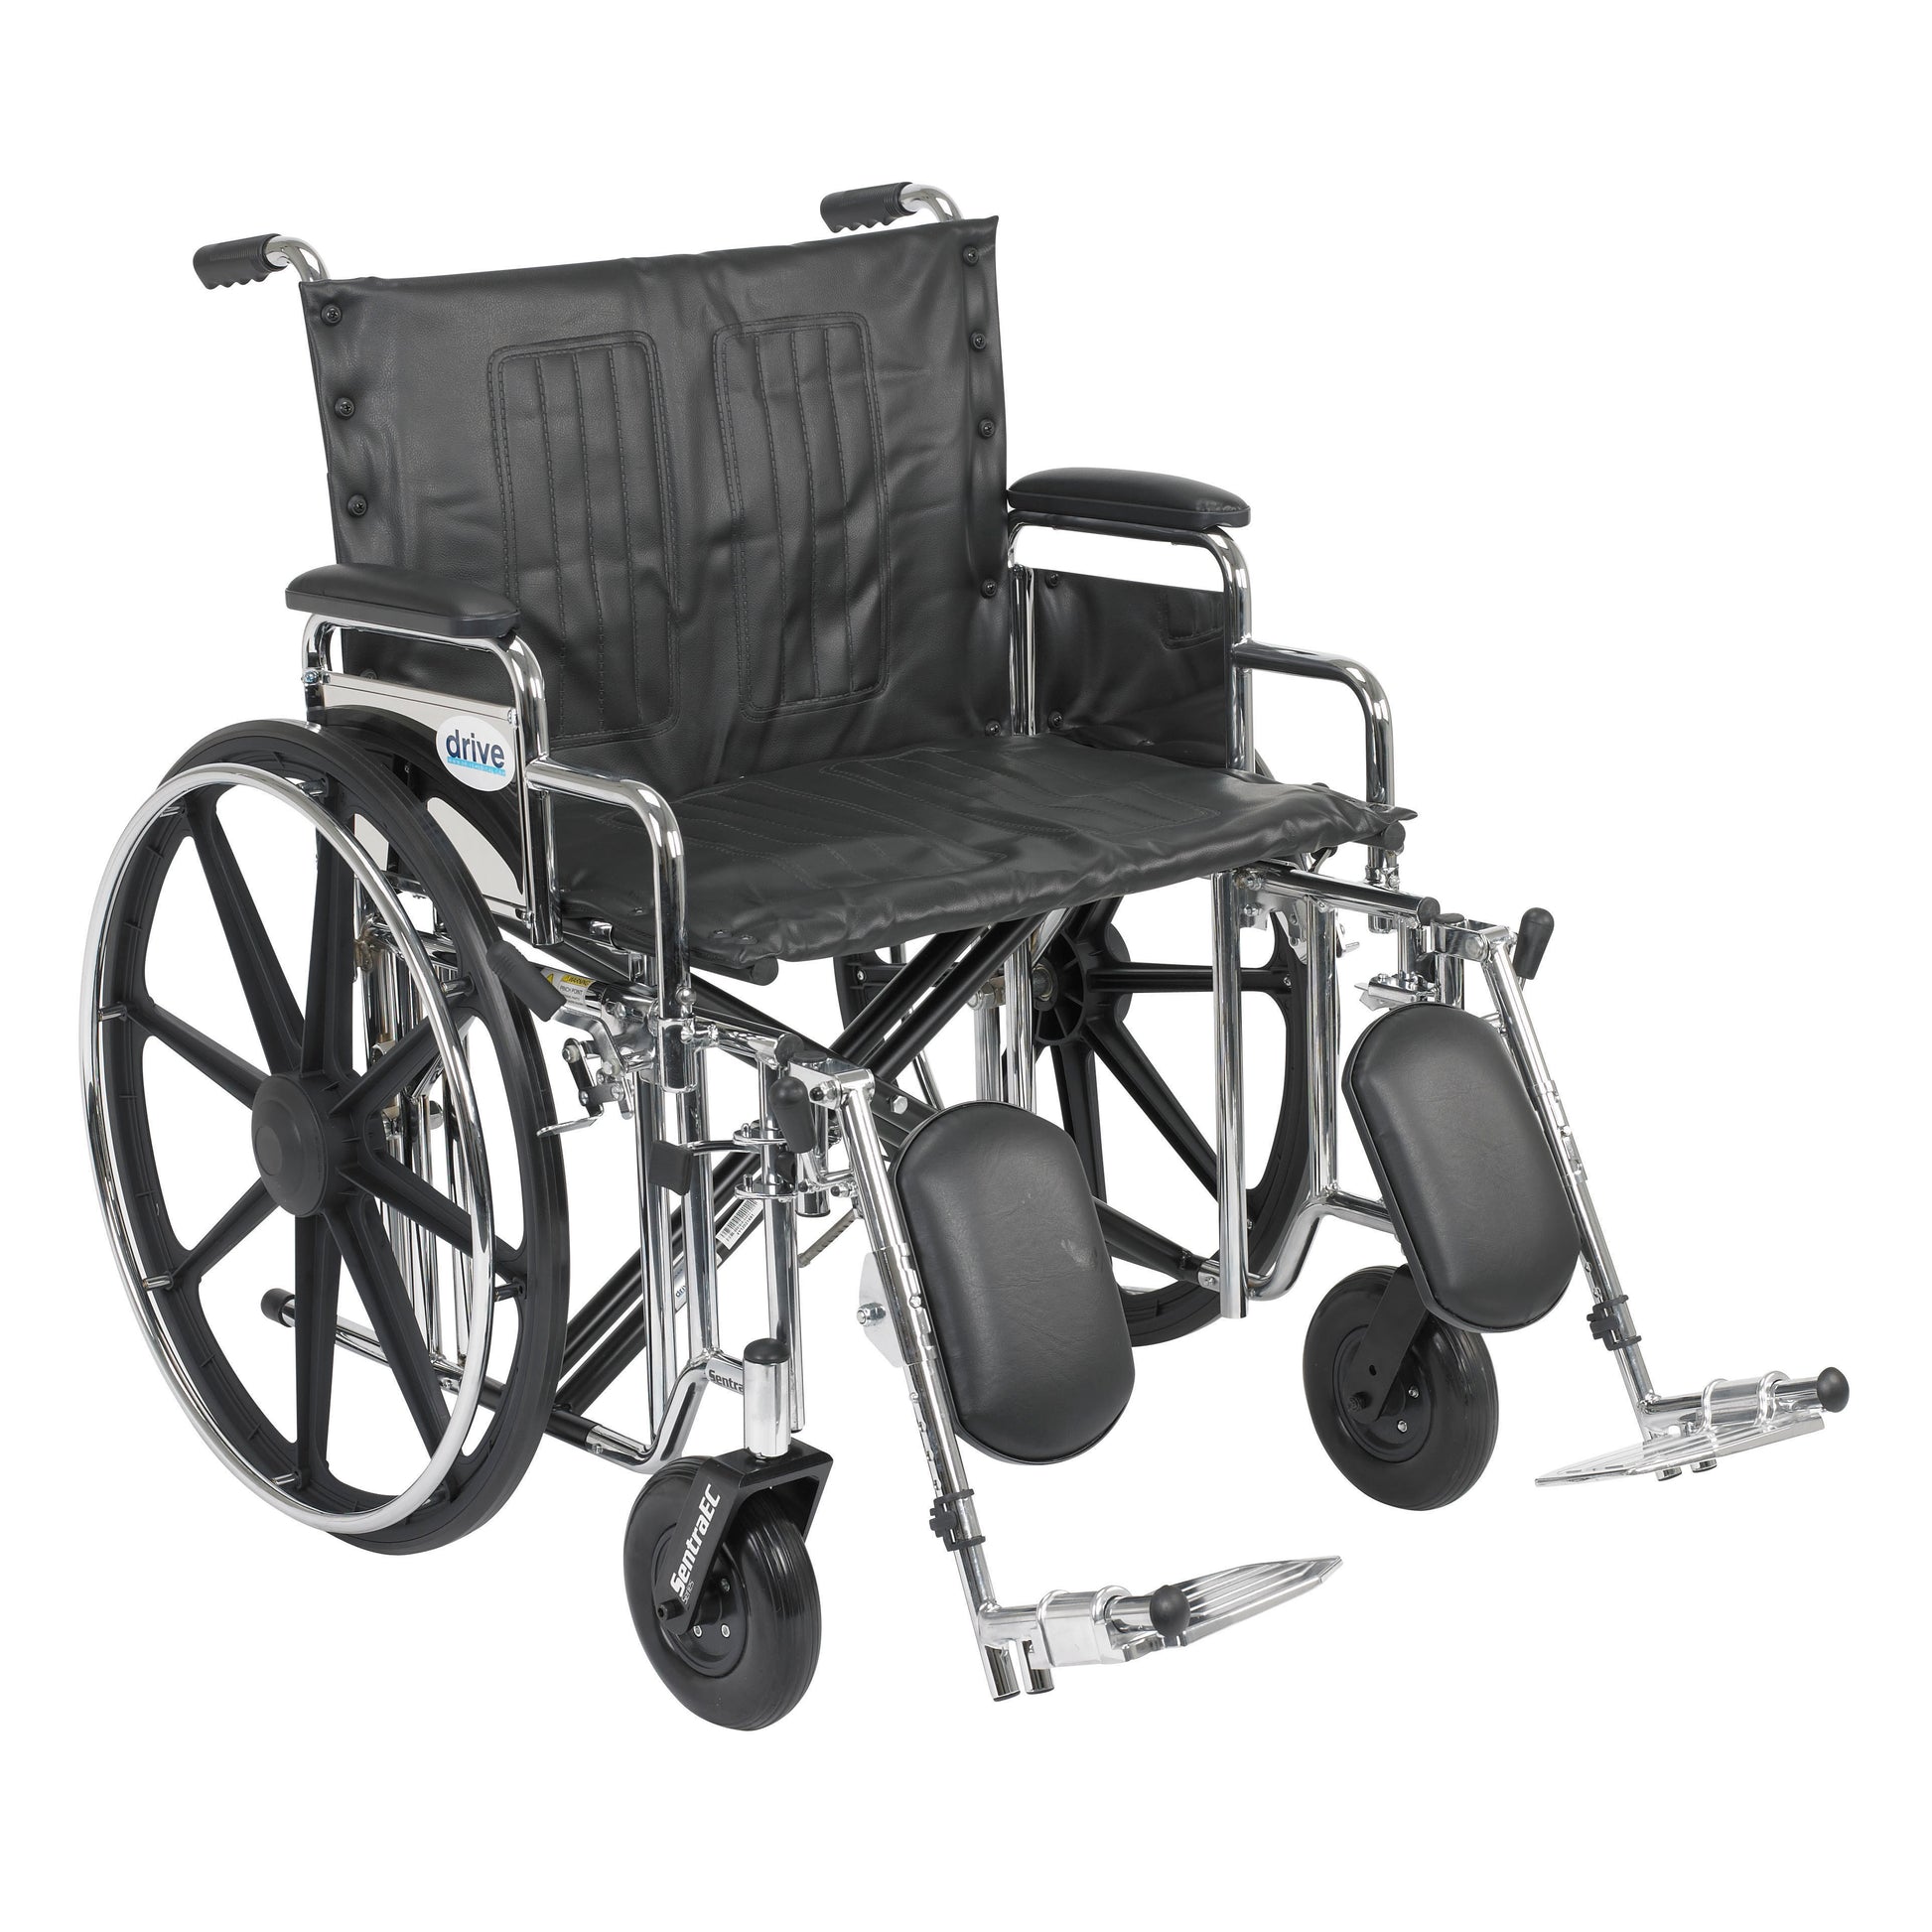 Sentra Extra Heavy Duty Wheelchair, Detachable Desk Arms, Elevating Leg Rests, 24"Seat